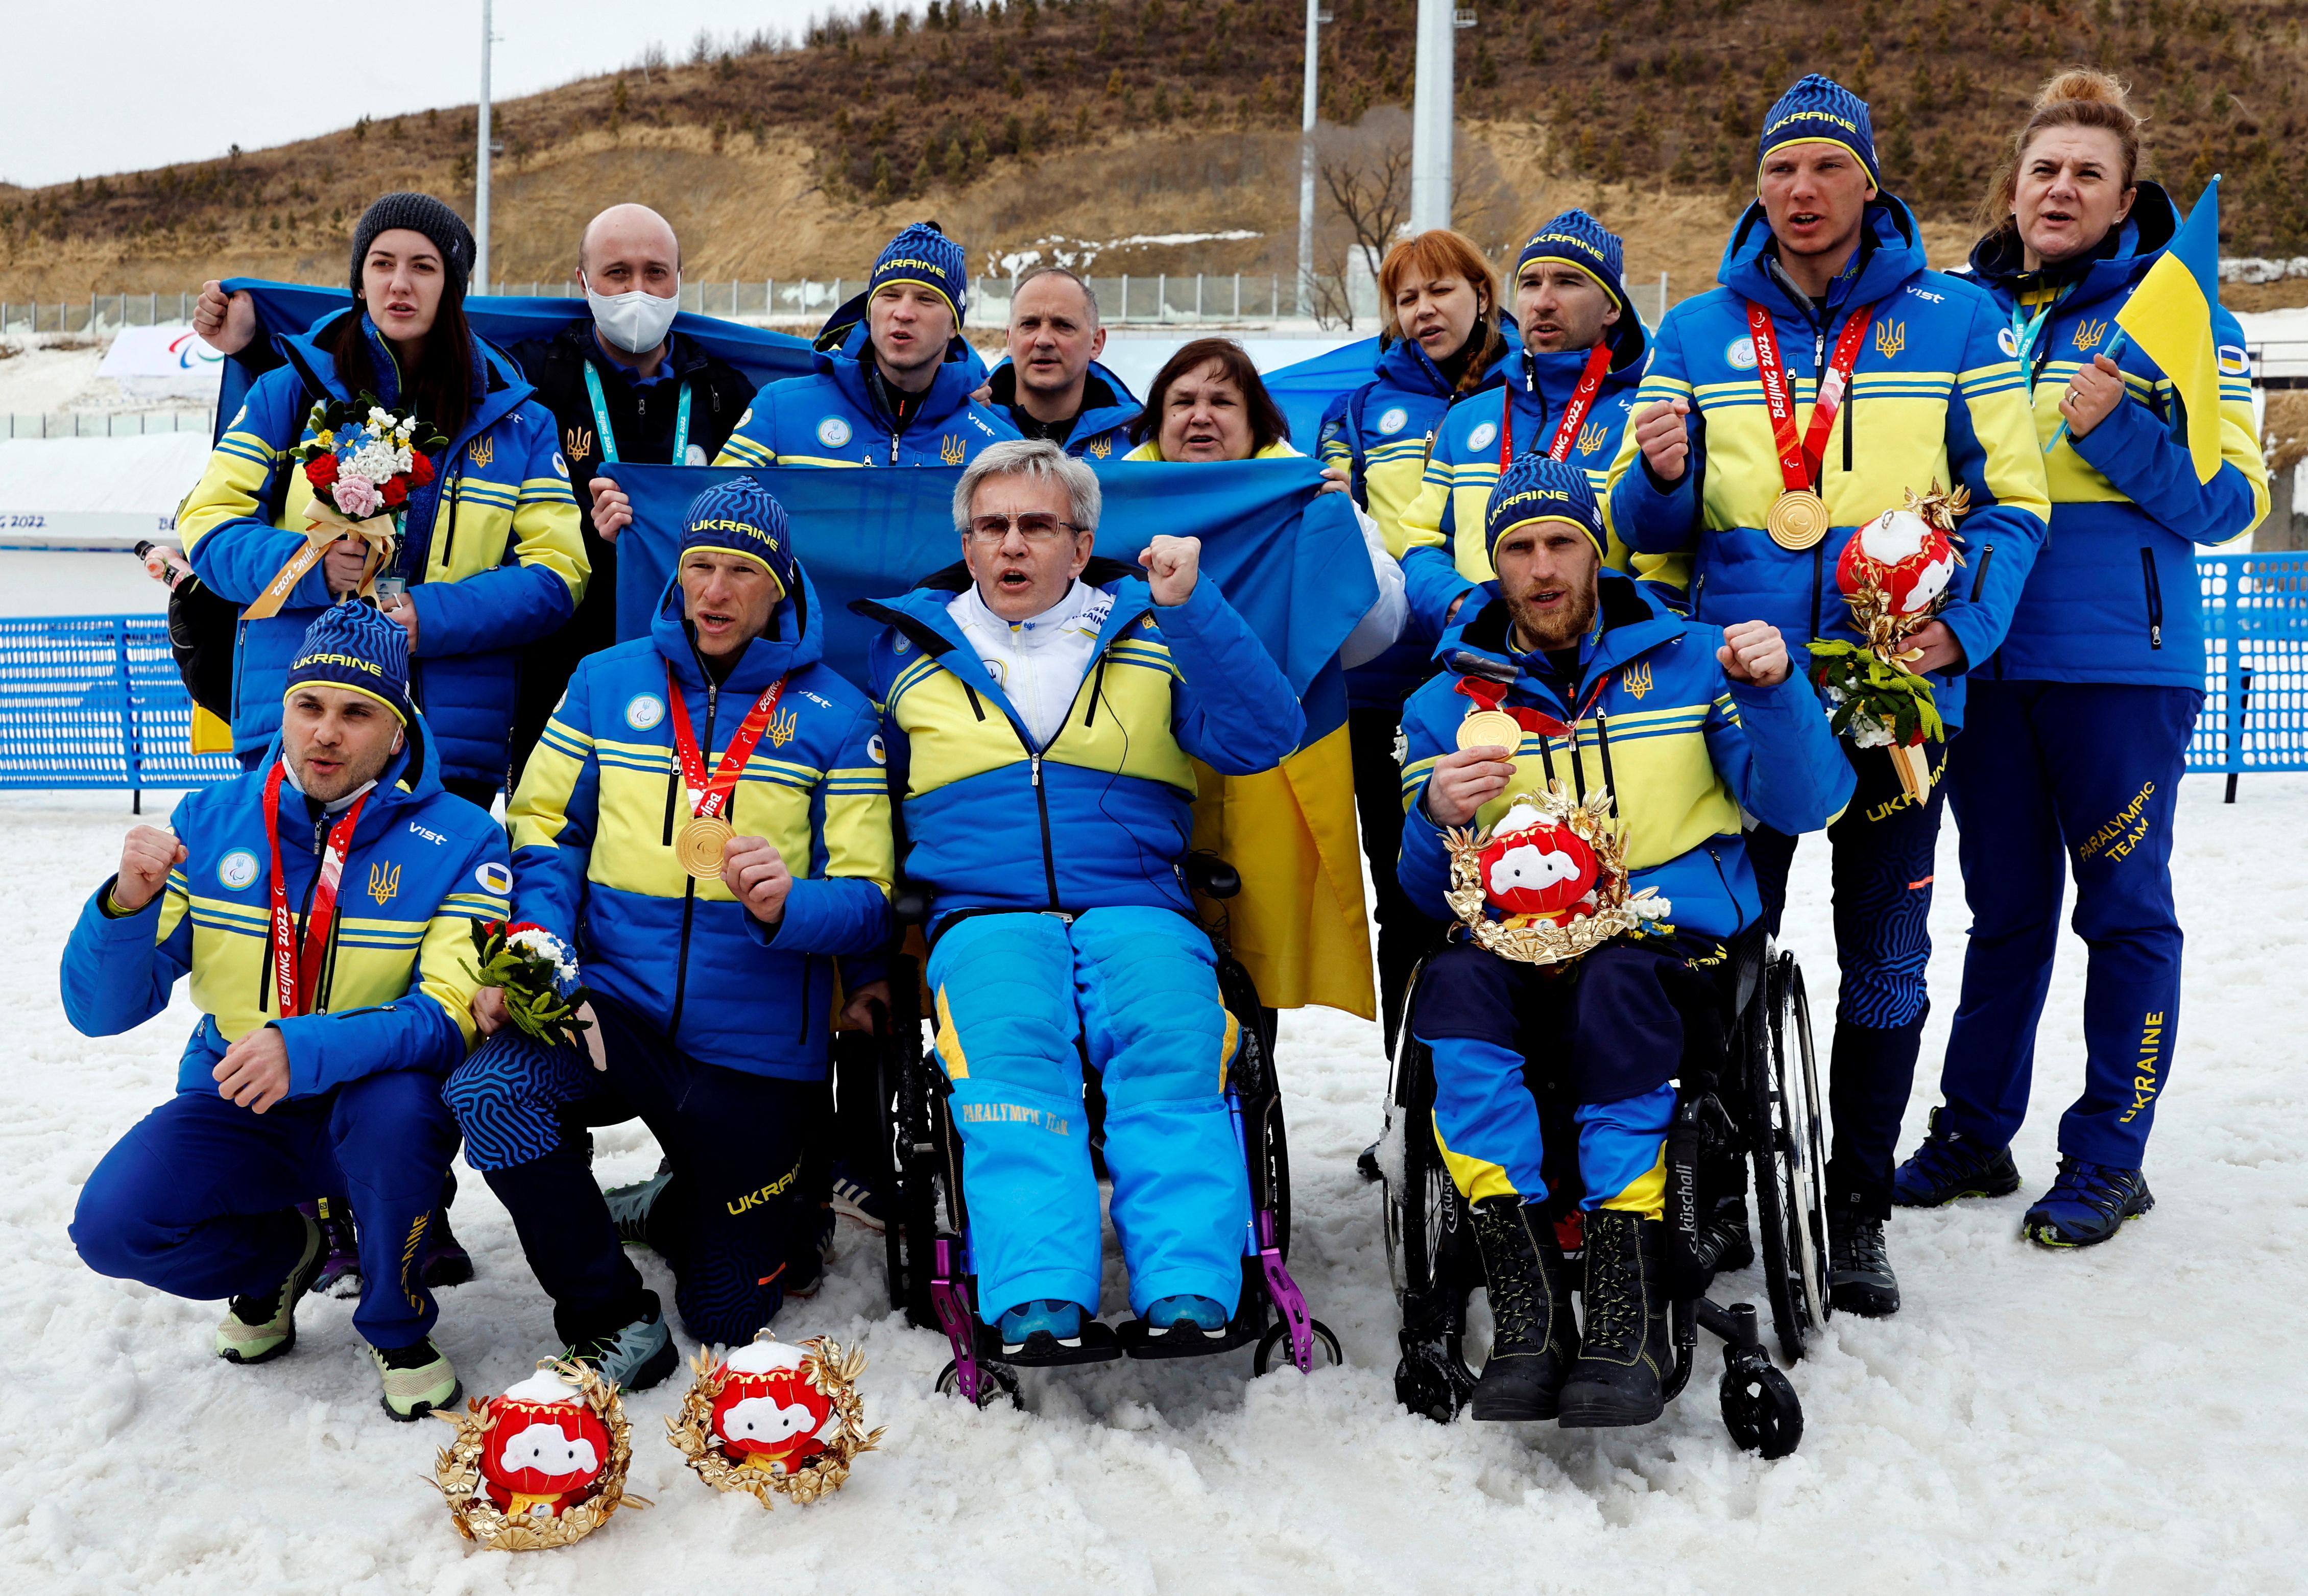 Beijing 2022 Winter Paralympic Games - Para Cross-Country Skiing - Open Relay 4 x 2.5km - National Biathlon Centre, Zhangjiakou, China - March 13, 2022. Gold medallists Dmytro Suiarko of Ukraine with guide Oleksandr Nikonovych of Ukraine, Grygorii Vovchynskyi of Ukraine, Vasyl Kravchuk of Ukraine and Anatolii Kovalevskyi of Ukraine with guide Oleksandr Mukshyn of Ukraine pose with Ukrainian Paralympic Committee president Valerii Sushkevych after the medal ceremony. REUTERS/Issei Kato     TPX IMAGES OF THE DAY